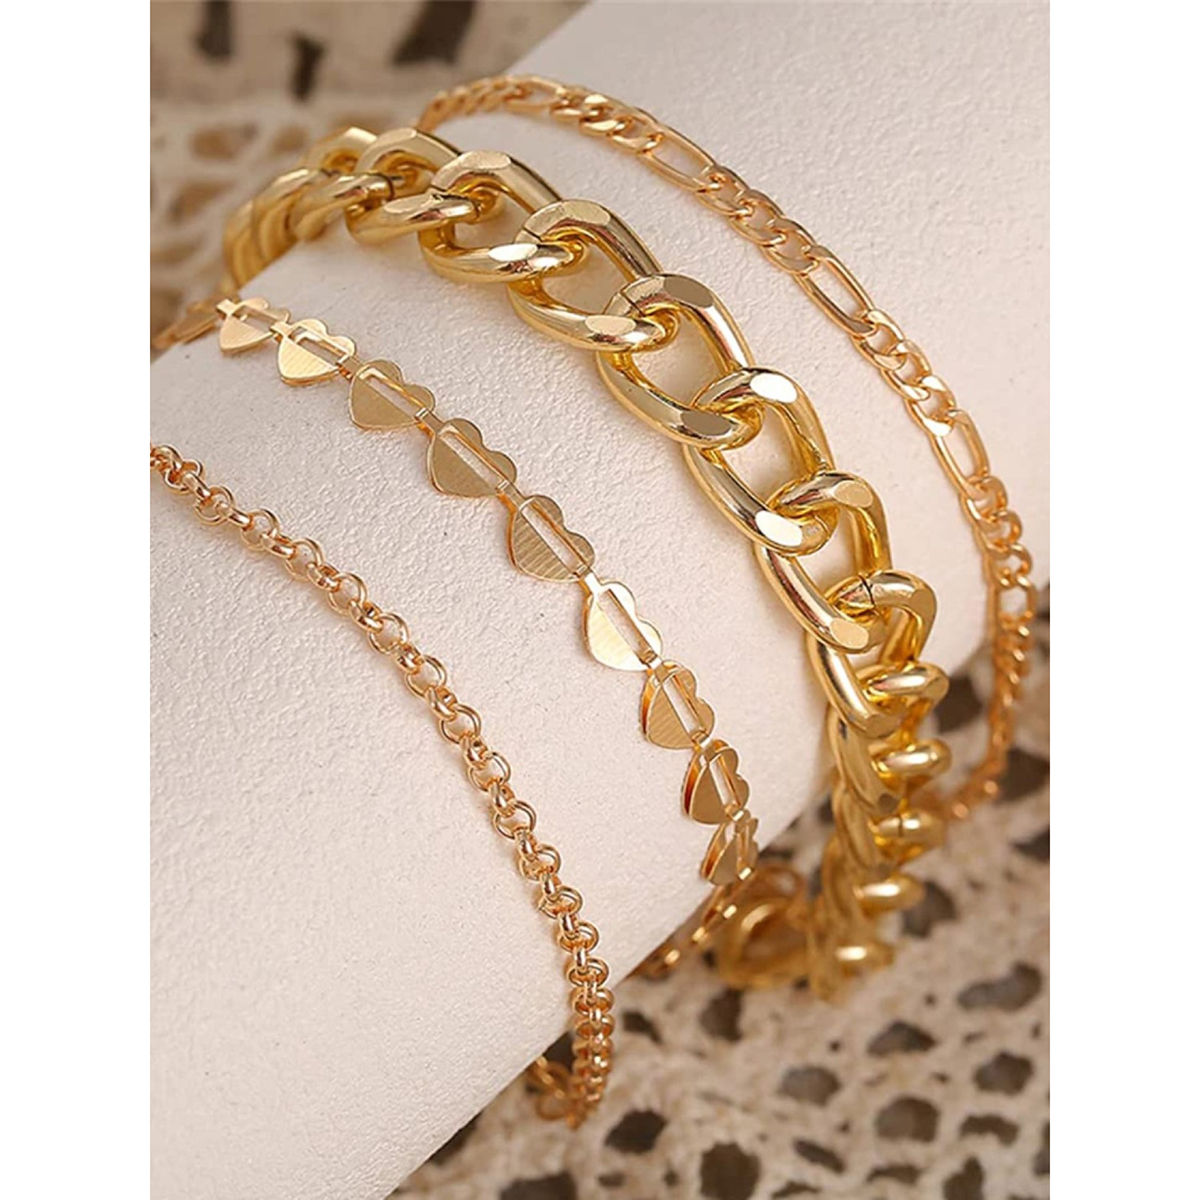 Top more than 77 gold chain charm bracelet super hot